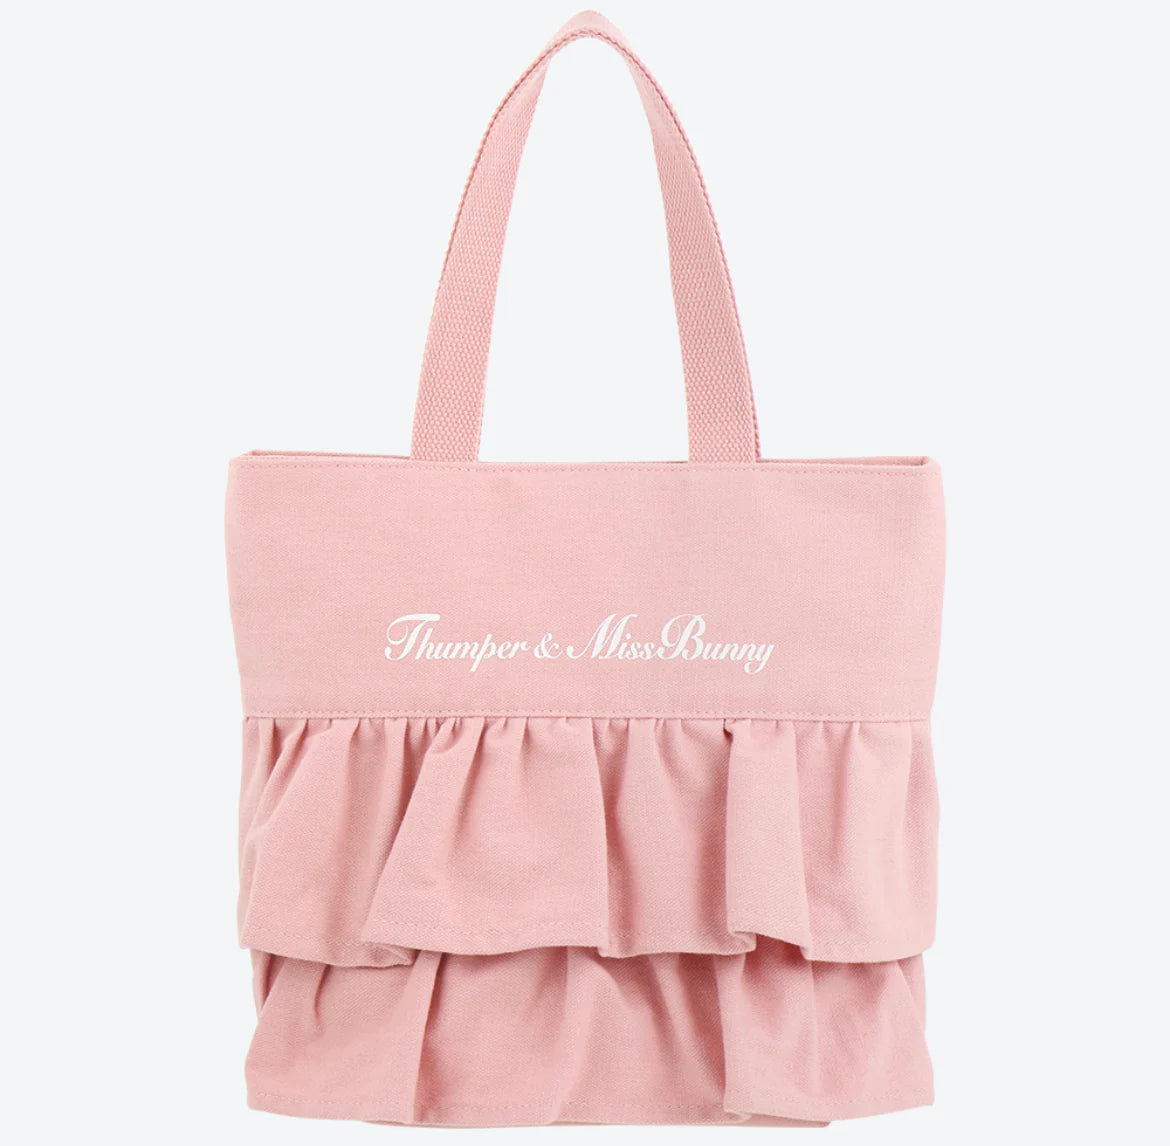 Thumper & Ms. bunny 雙面Tote Bag